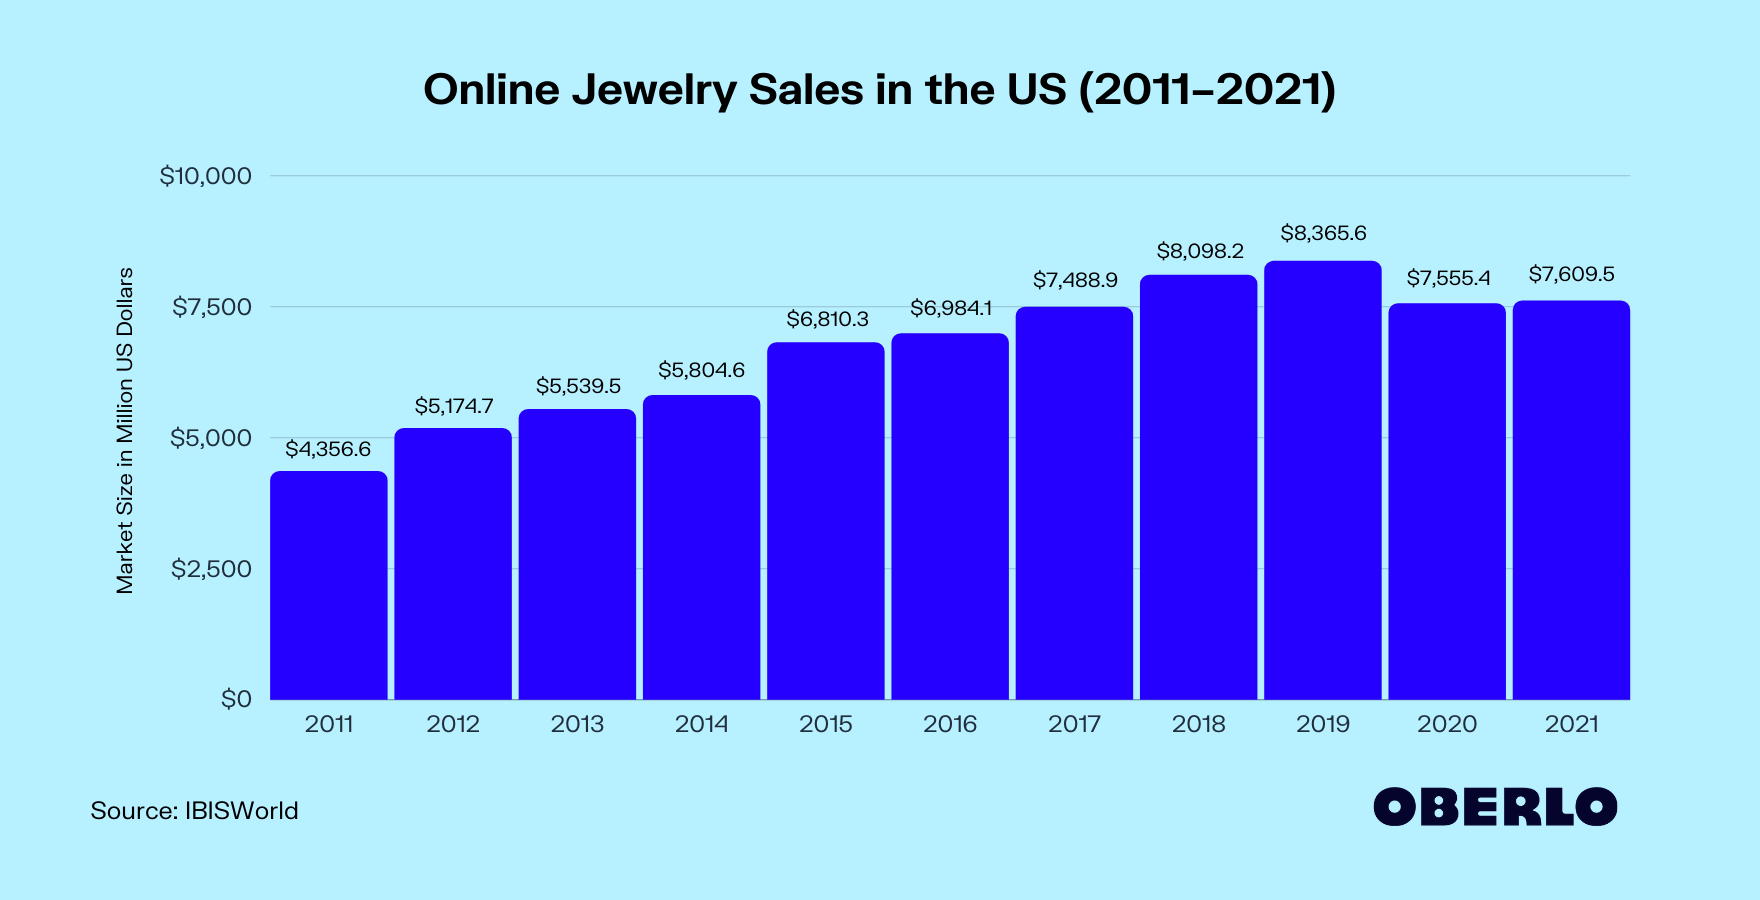 graph of online jewelry sales in the US from 2011-2021 from Oberlo